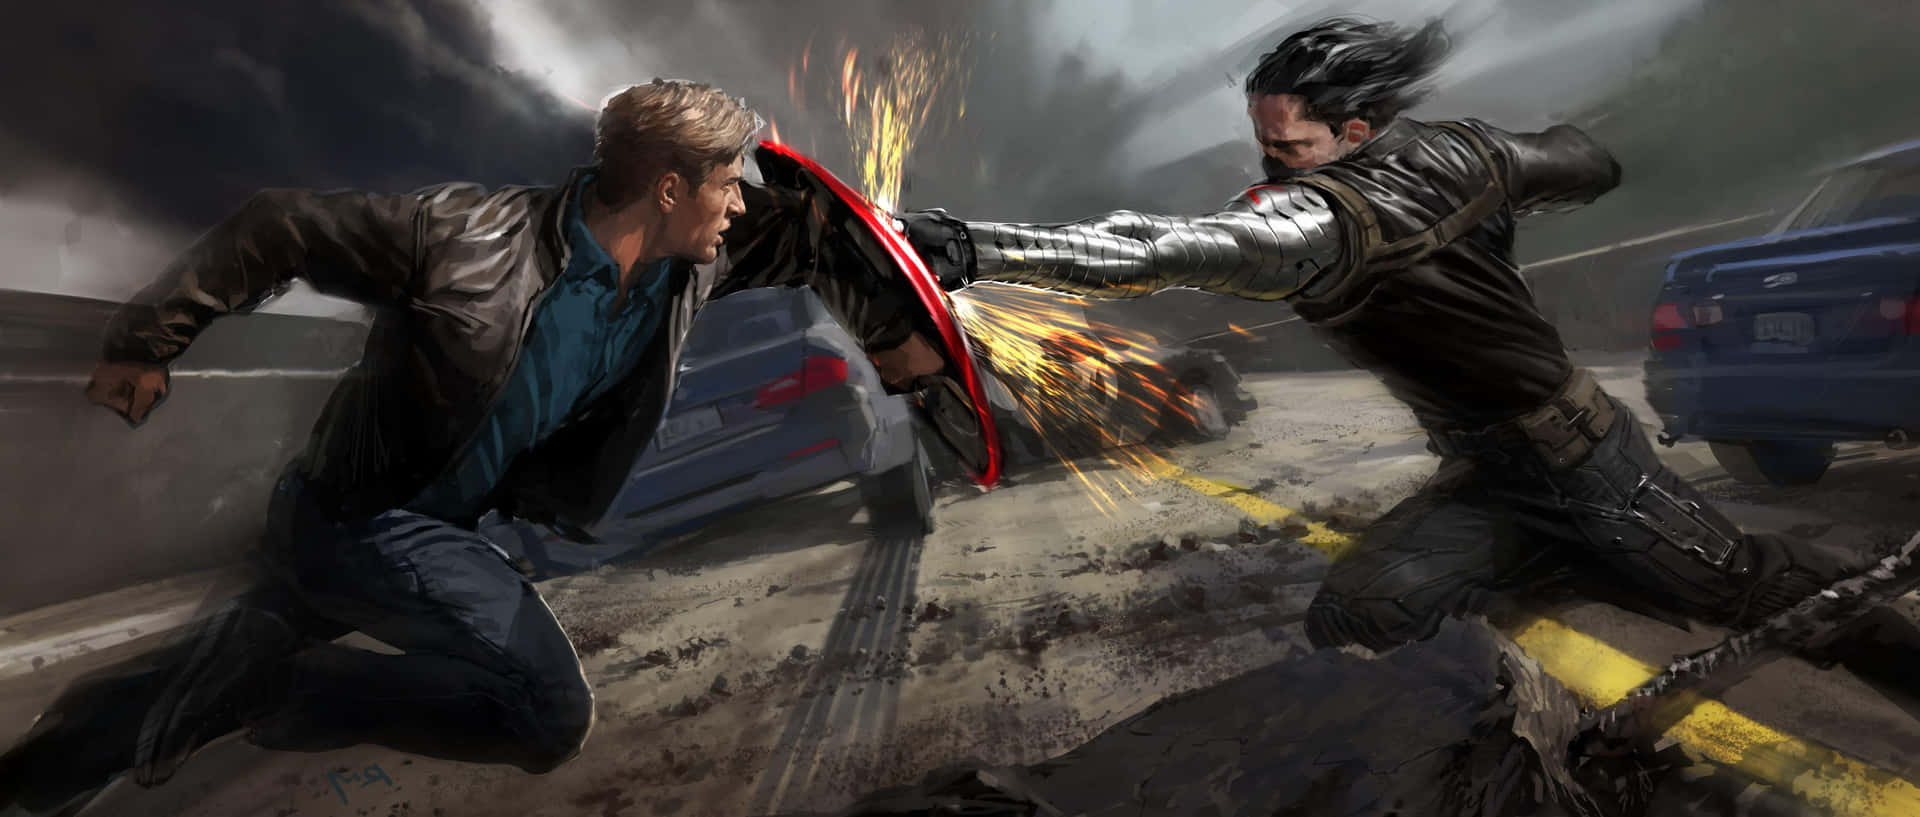 Iron Man and Captain America prepare to enter a heated battle in this Marvel blockbuster scene. Wallpaper